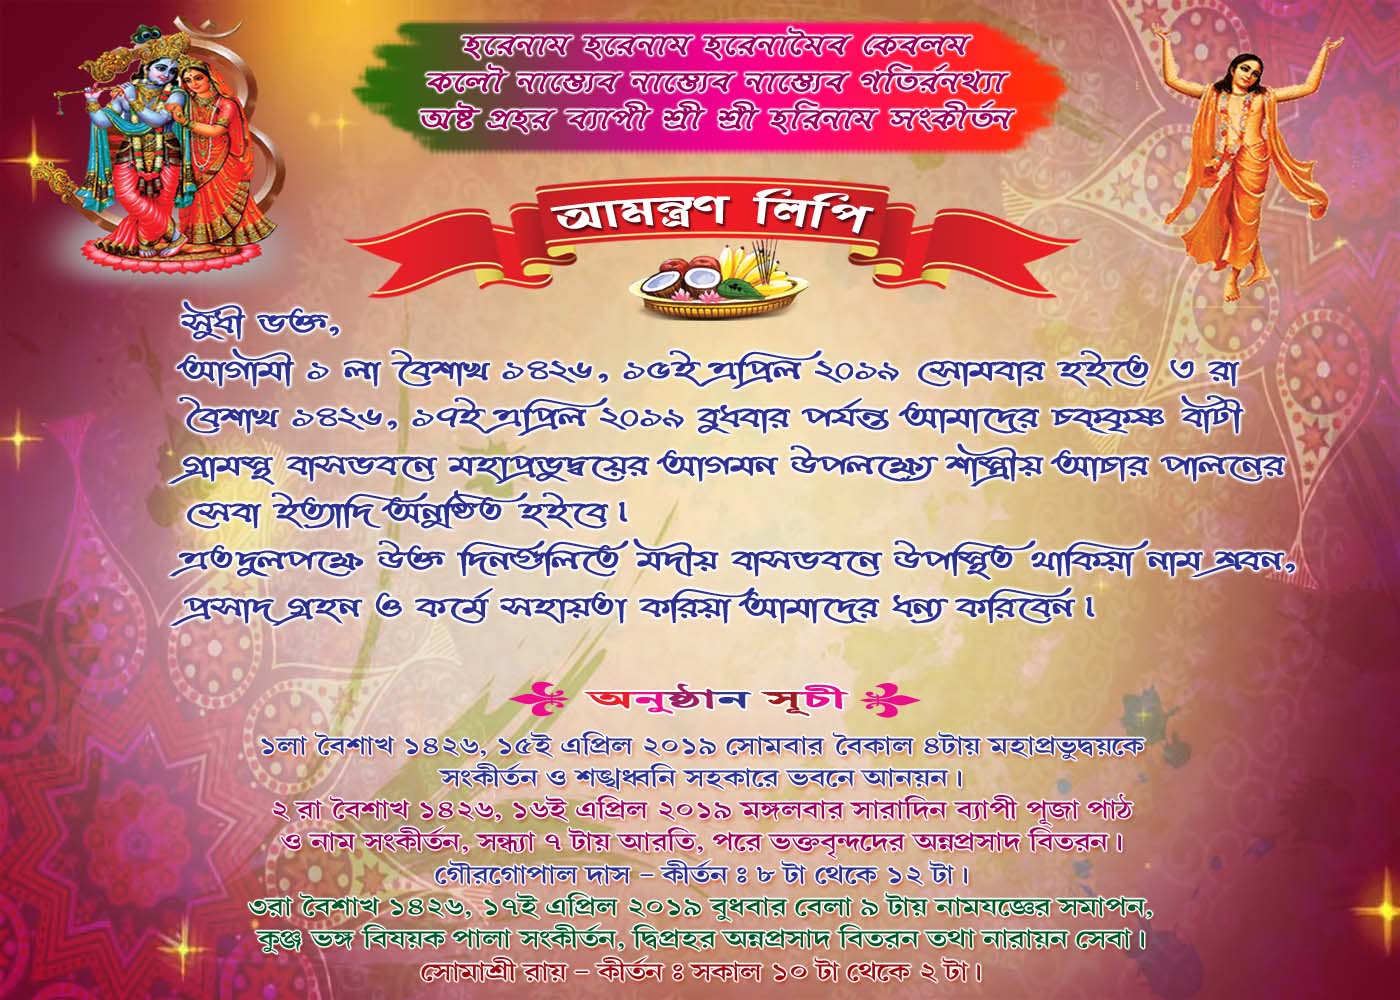 bengal puja invitation card » Picture Density